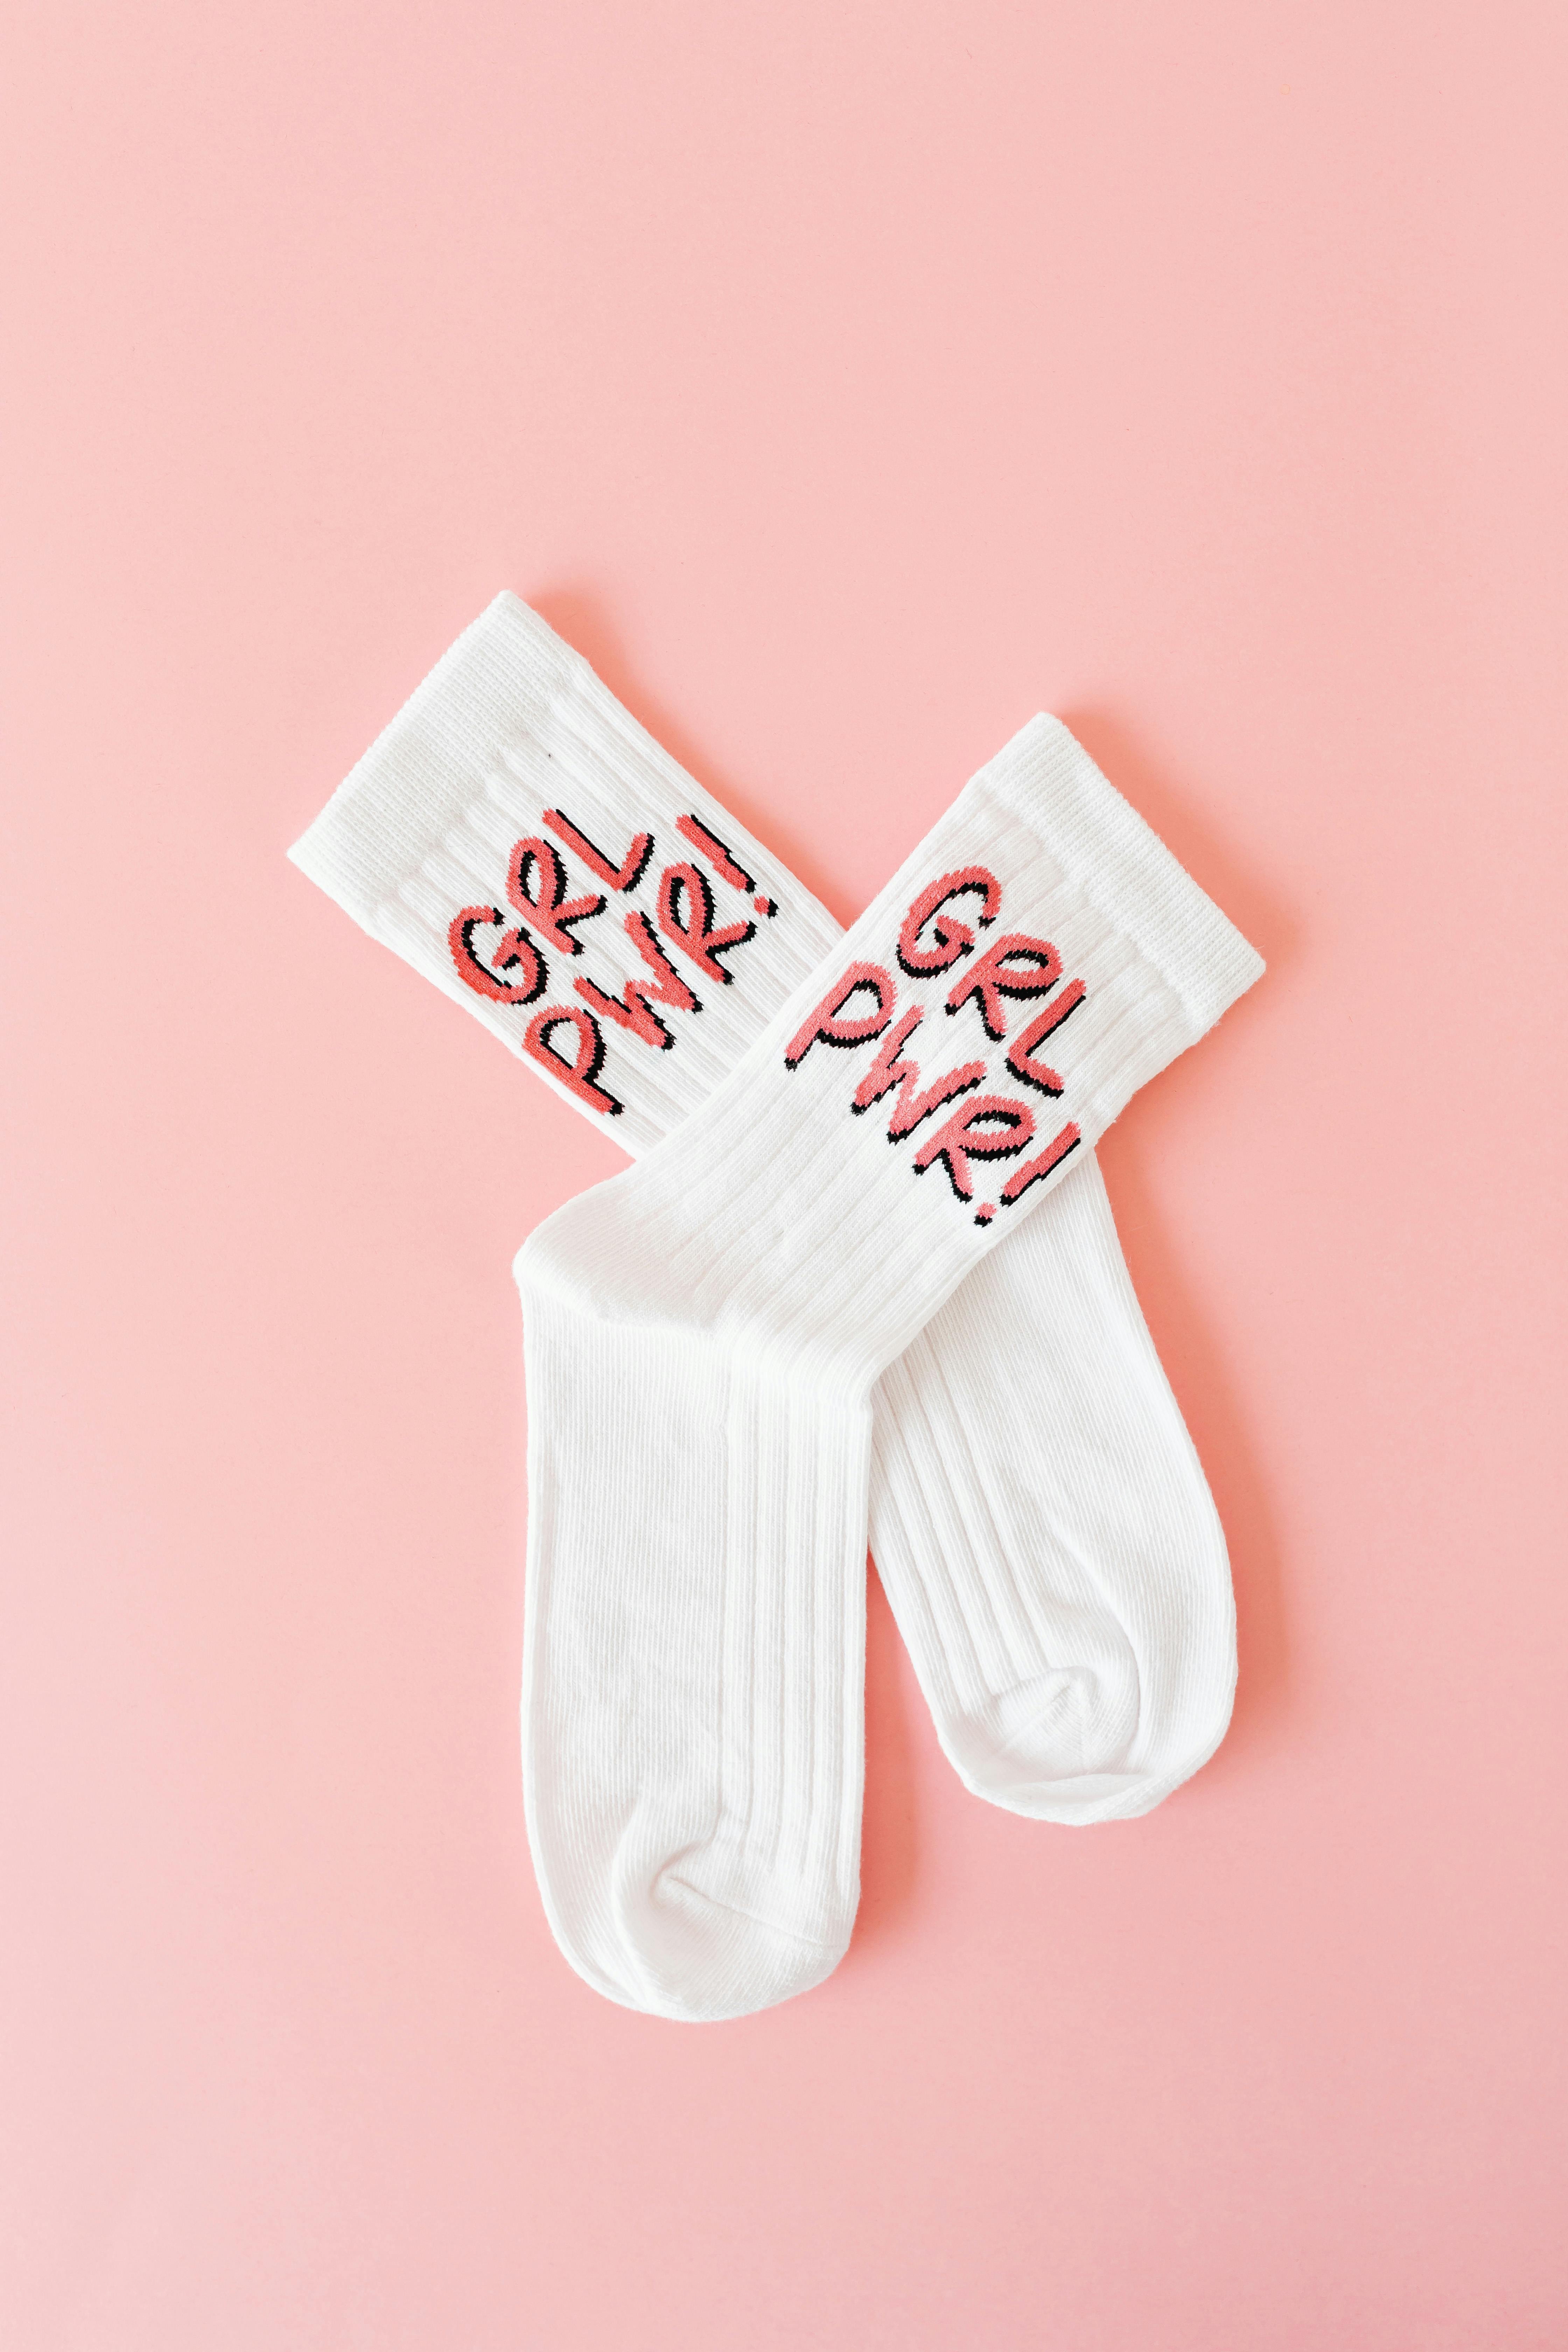 photo of socks on pink surface